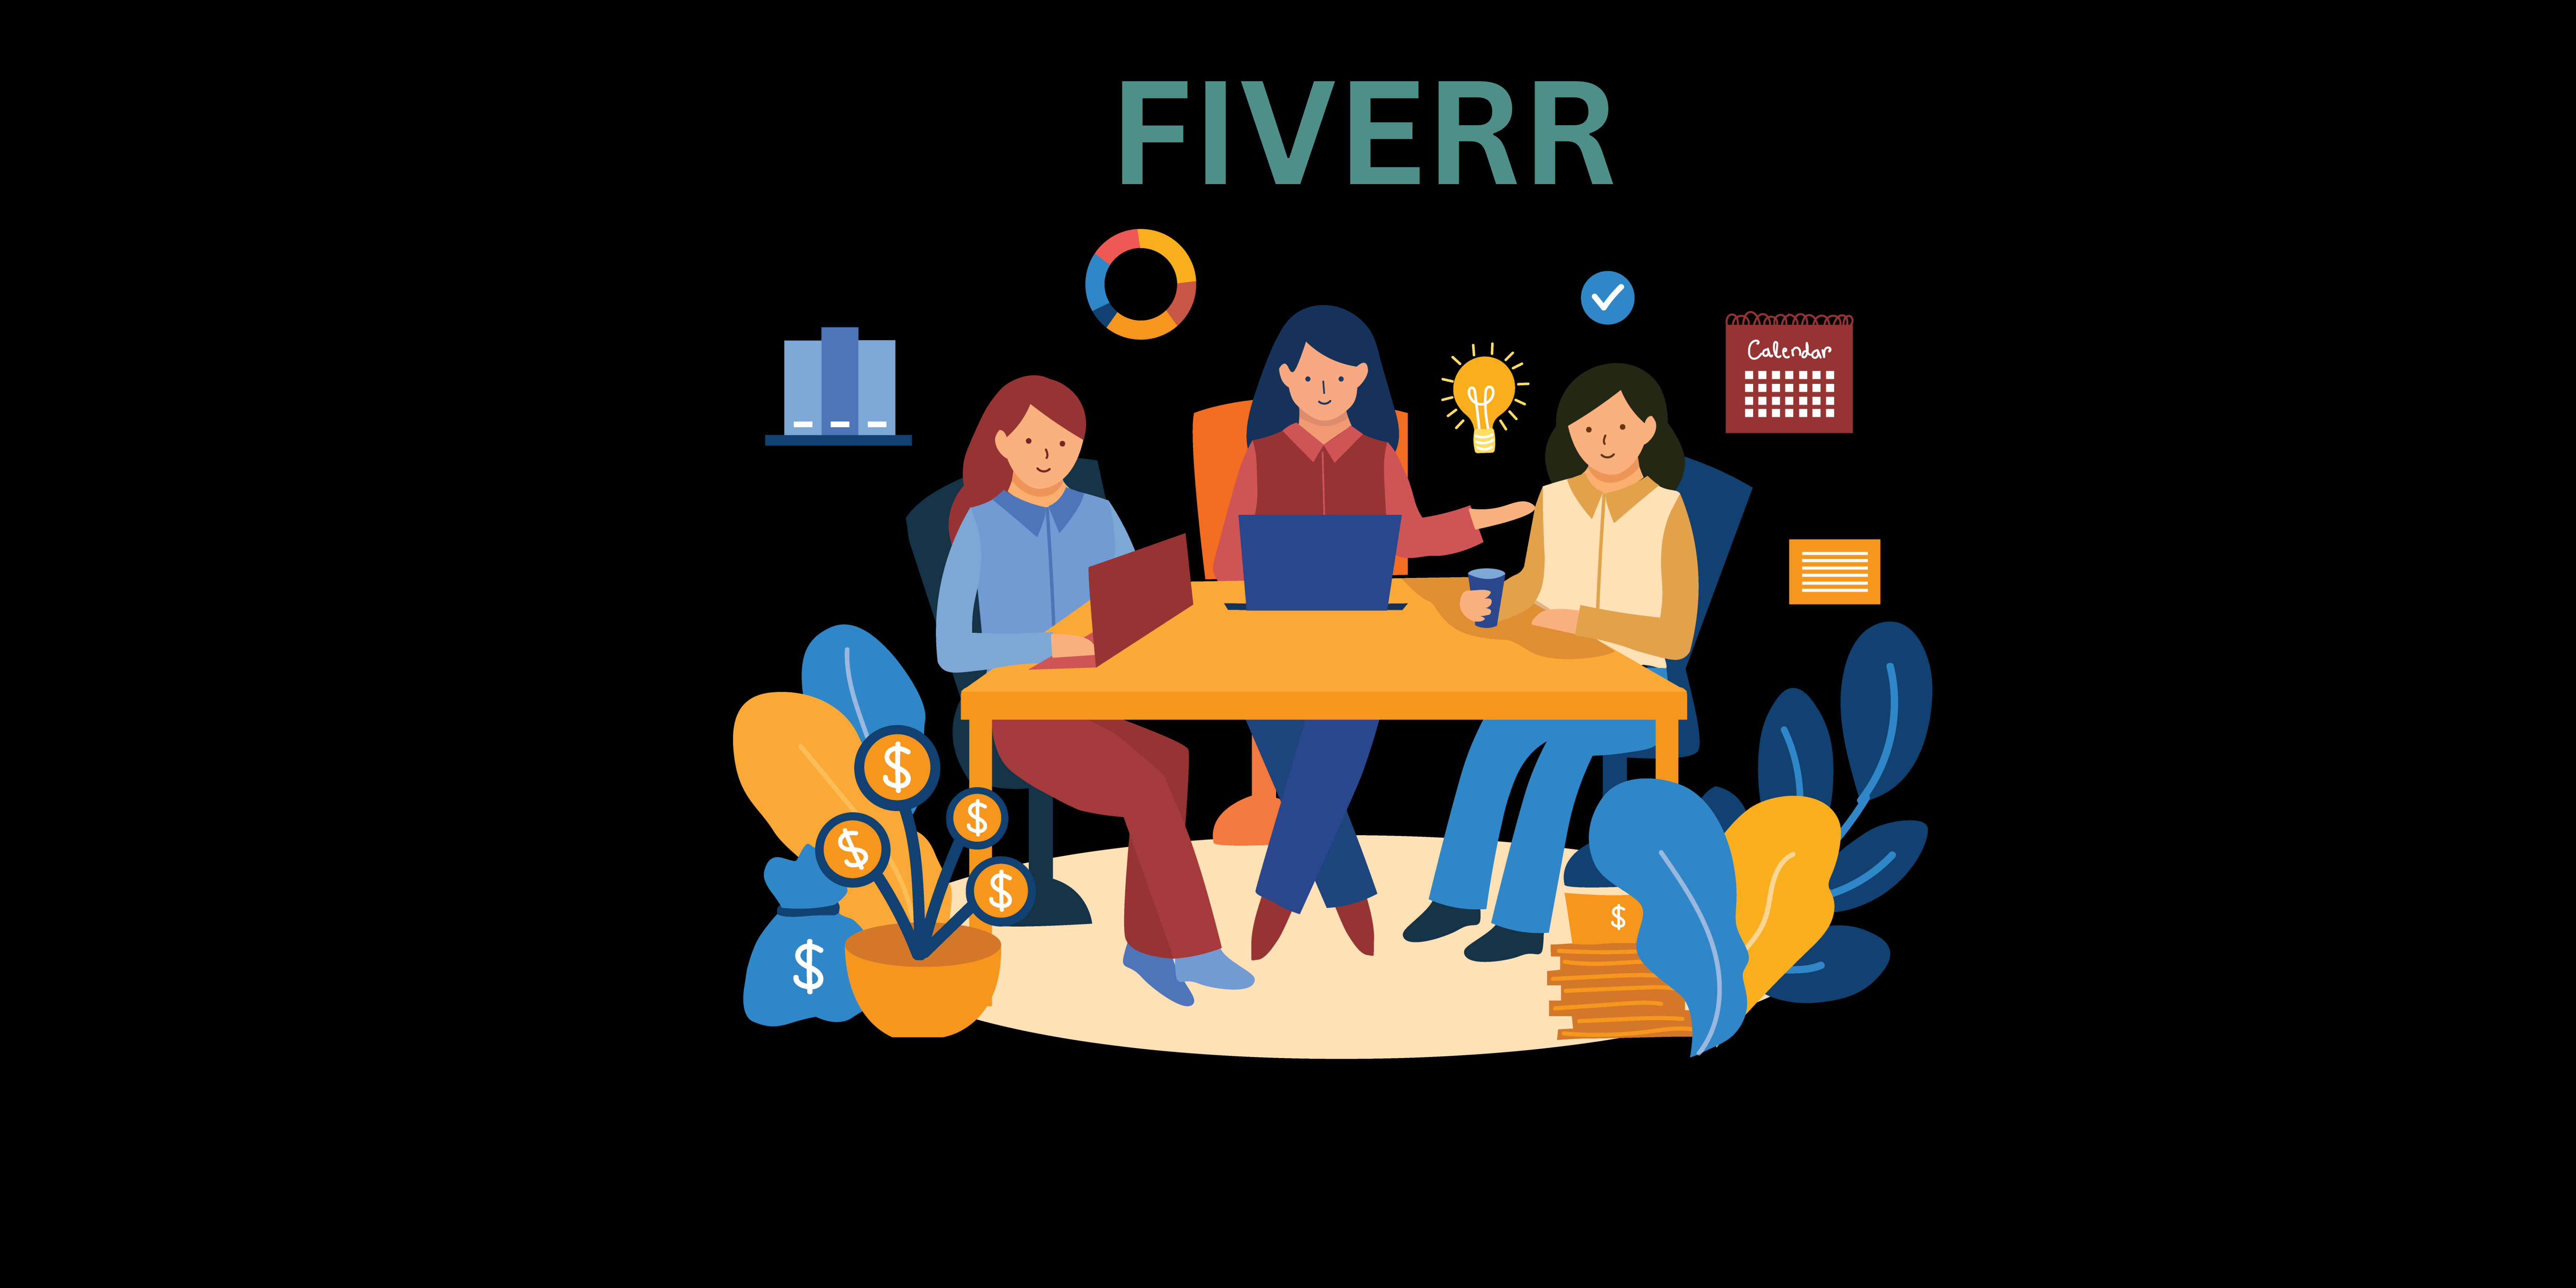 FIVERR How to Make Money